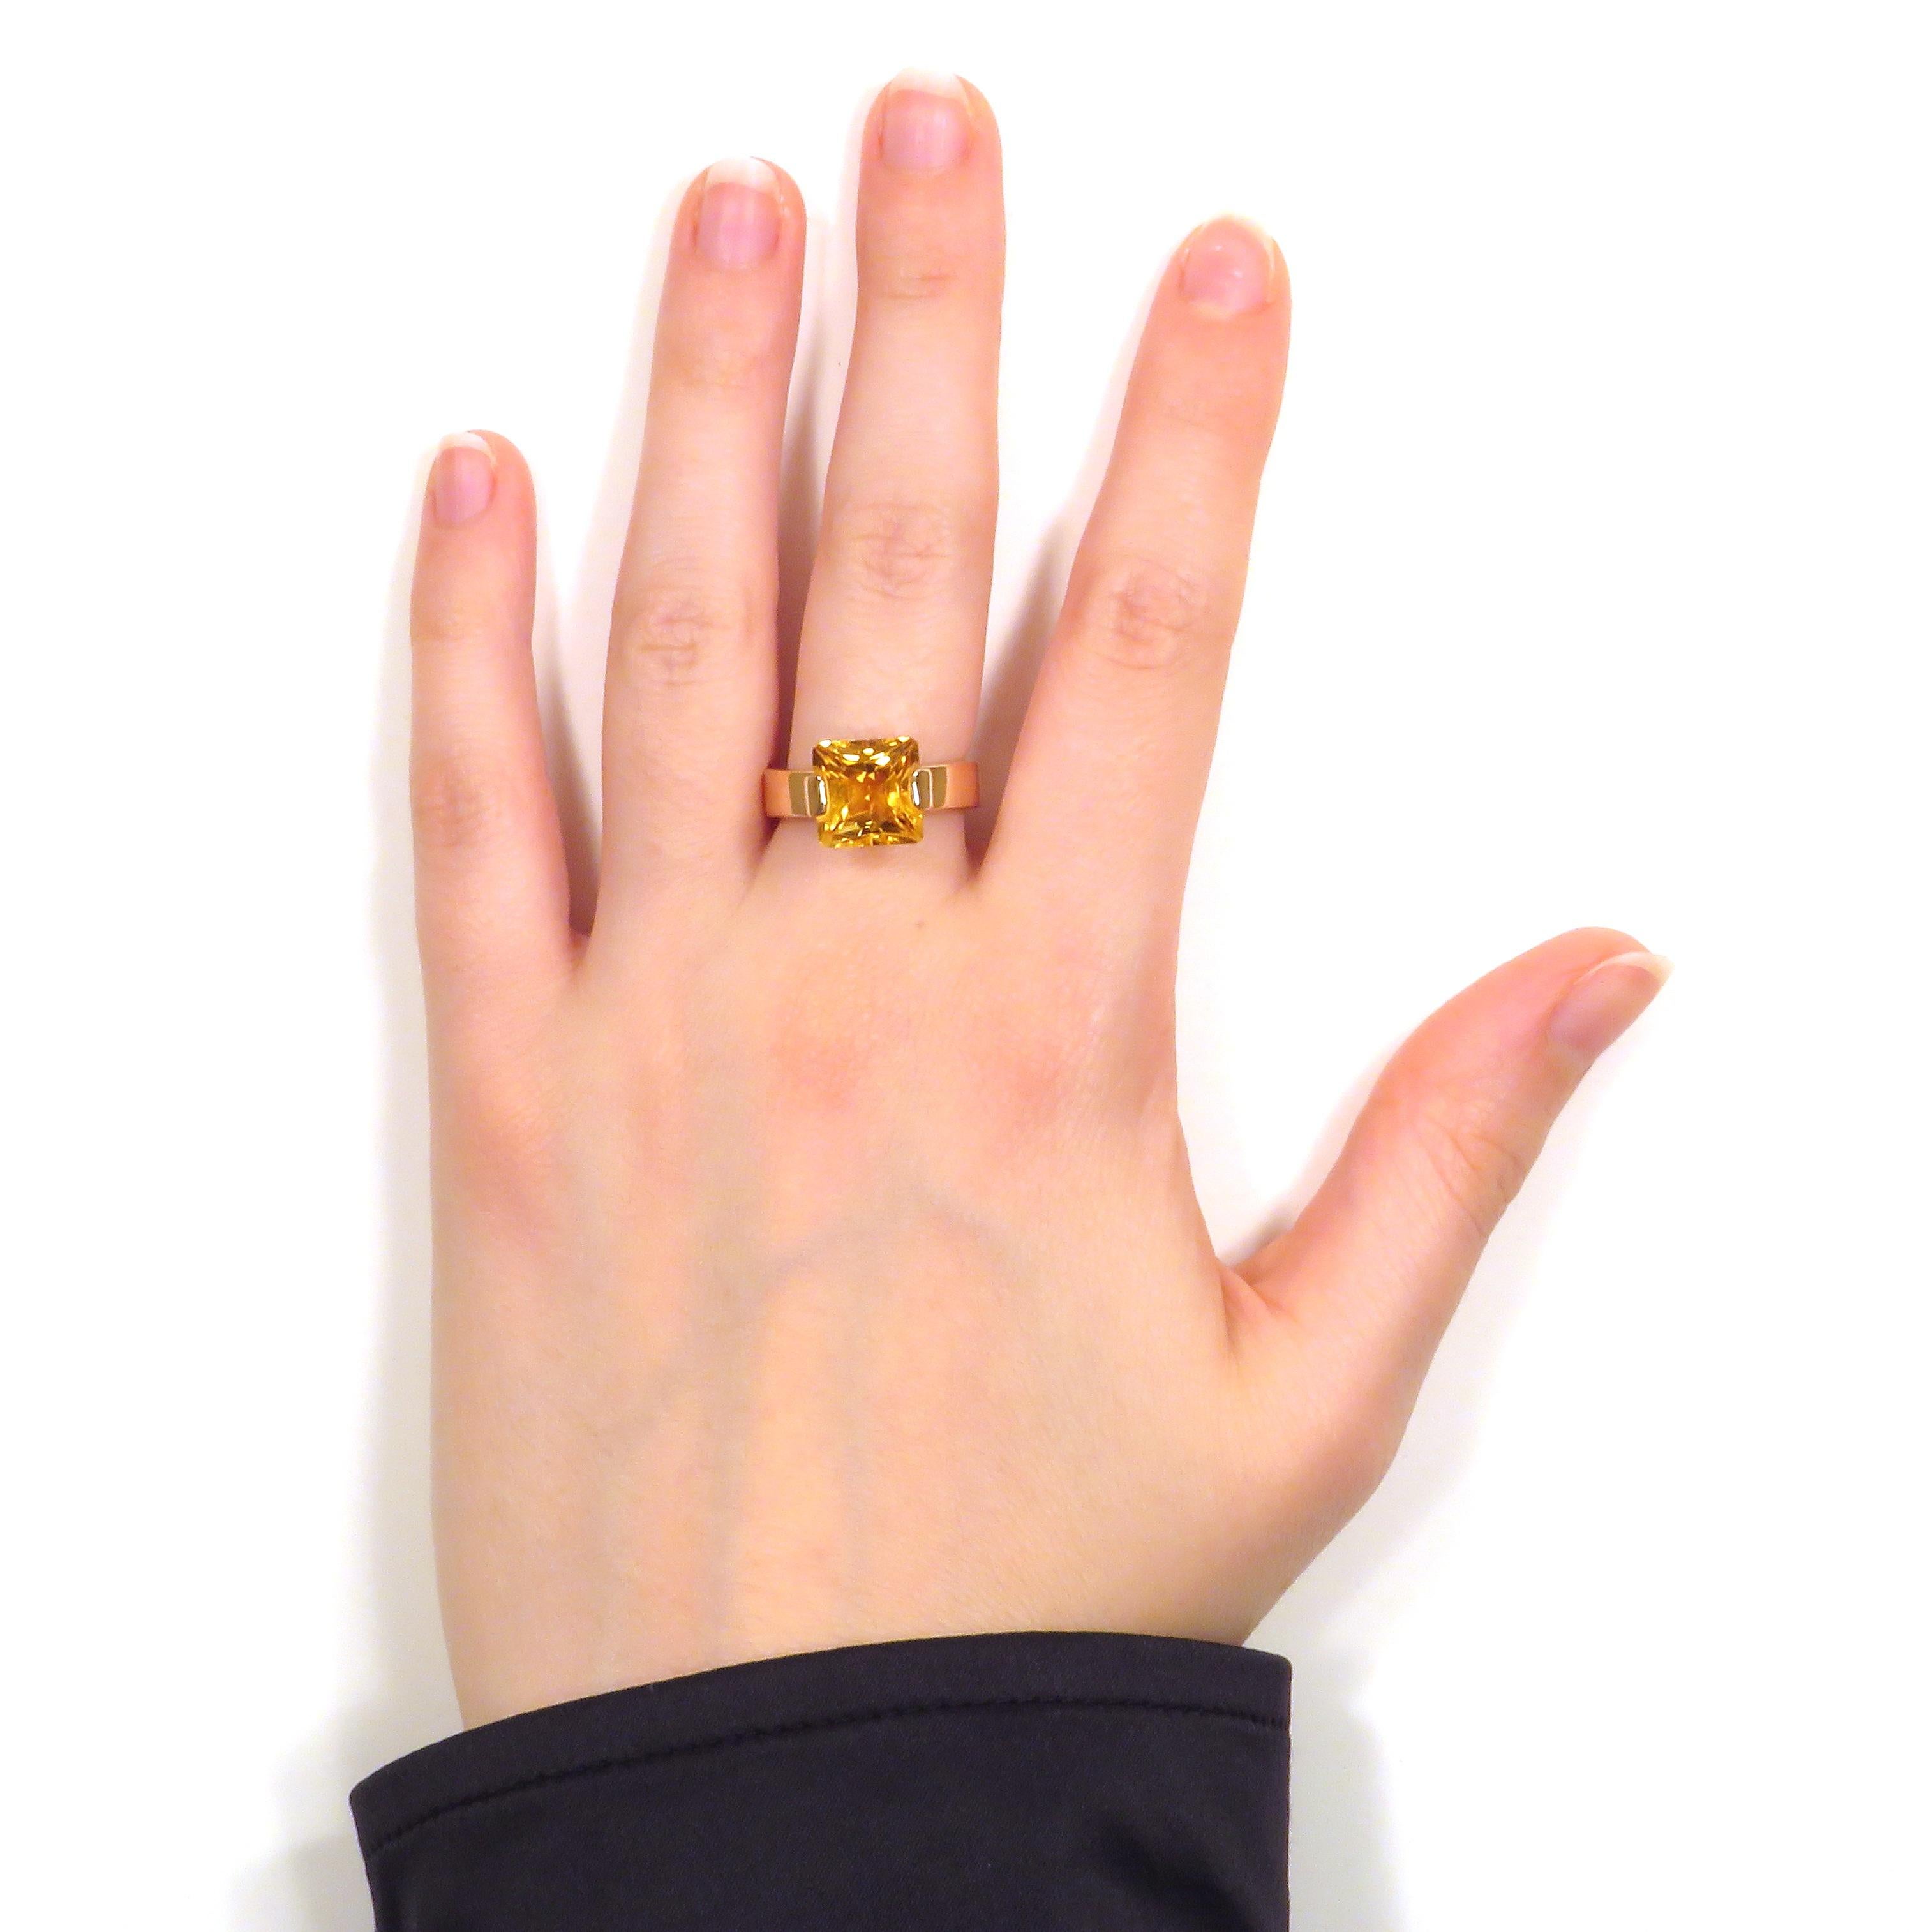 Modern band ring in 9k rose gold with a square gold citrine 2.9 ctw. The size of the gemstone is 10 x 10 millimeters / 0.39 x 0.39 inches.
Us finger size 6 1/2 / Italian size 13 / French size 53. It can be resized to the customer's size before